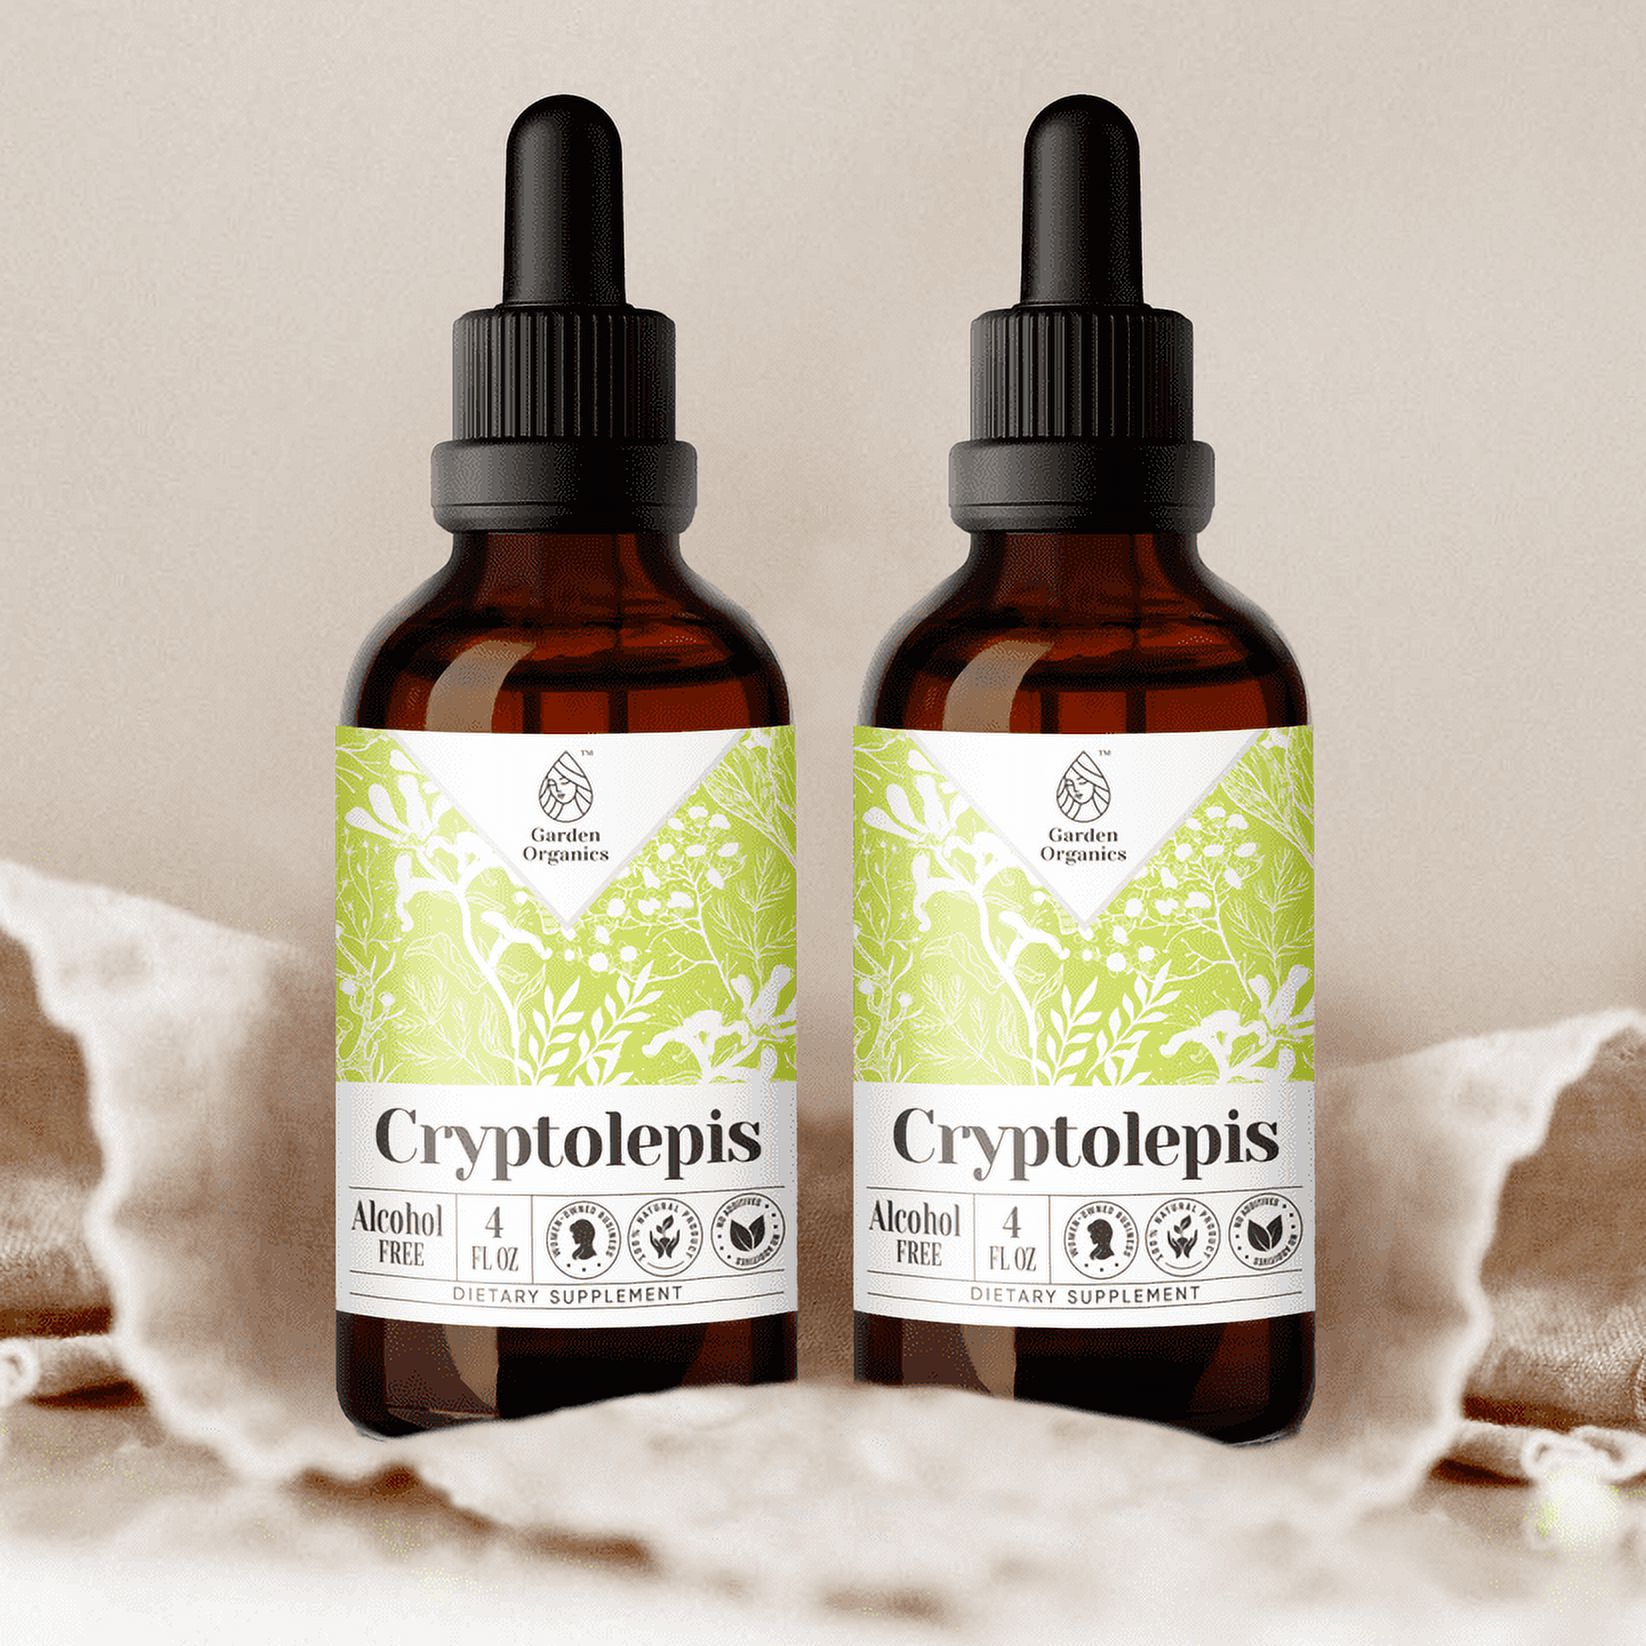 Garden Organics Cryptolepis Tincture Alcohol-FREE Extract, Wildcrafted Cryptolepis (Cryptolepis sanguinolenta) Dried Root 2x4 oz - image 1 of 6